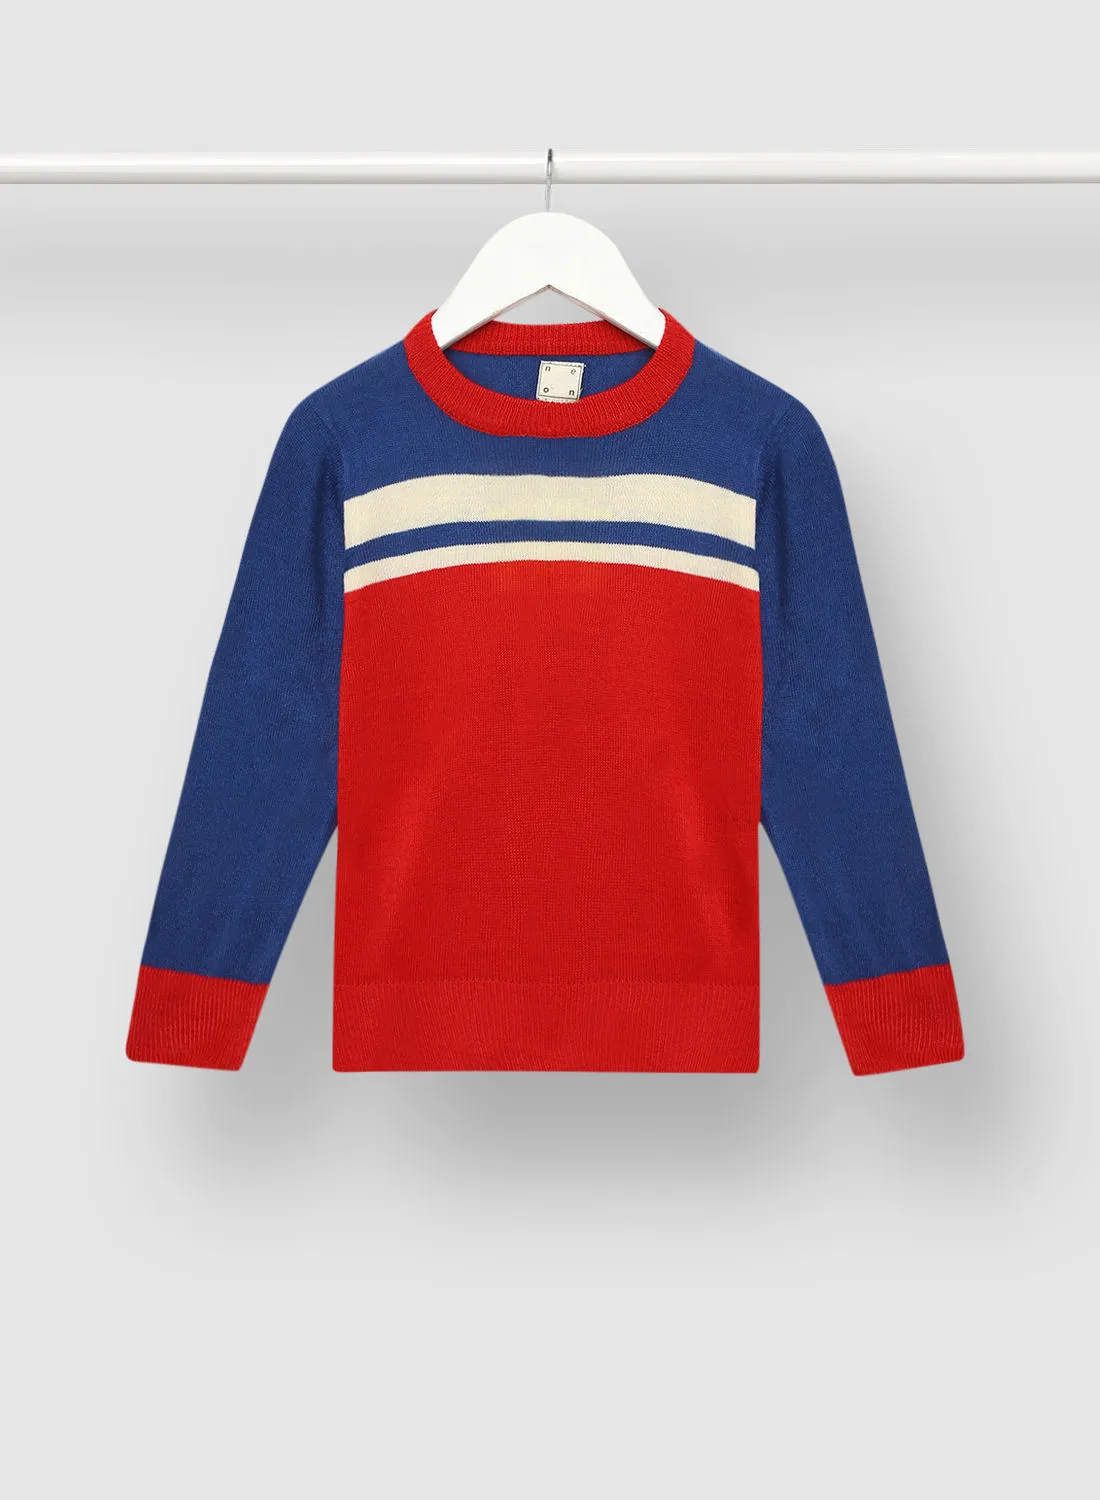 NEON Boy Casual Long Sleeve Sweater Blue/Red